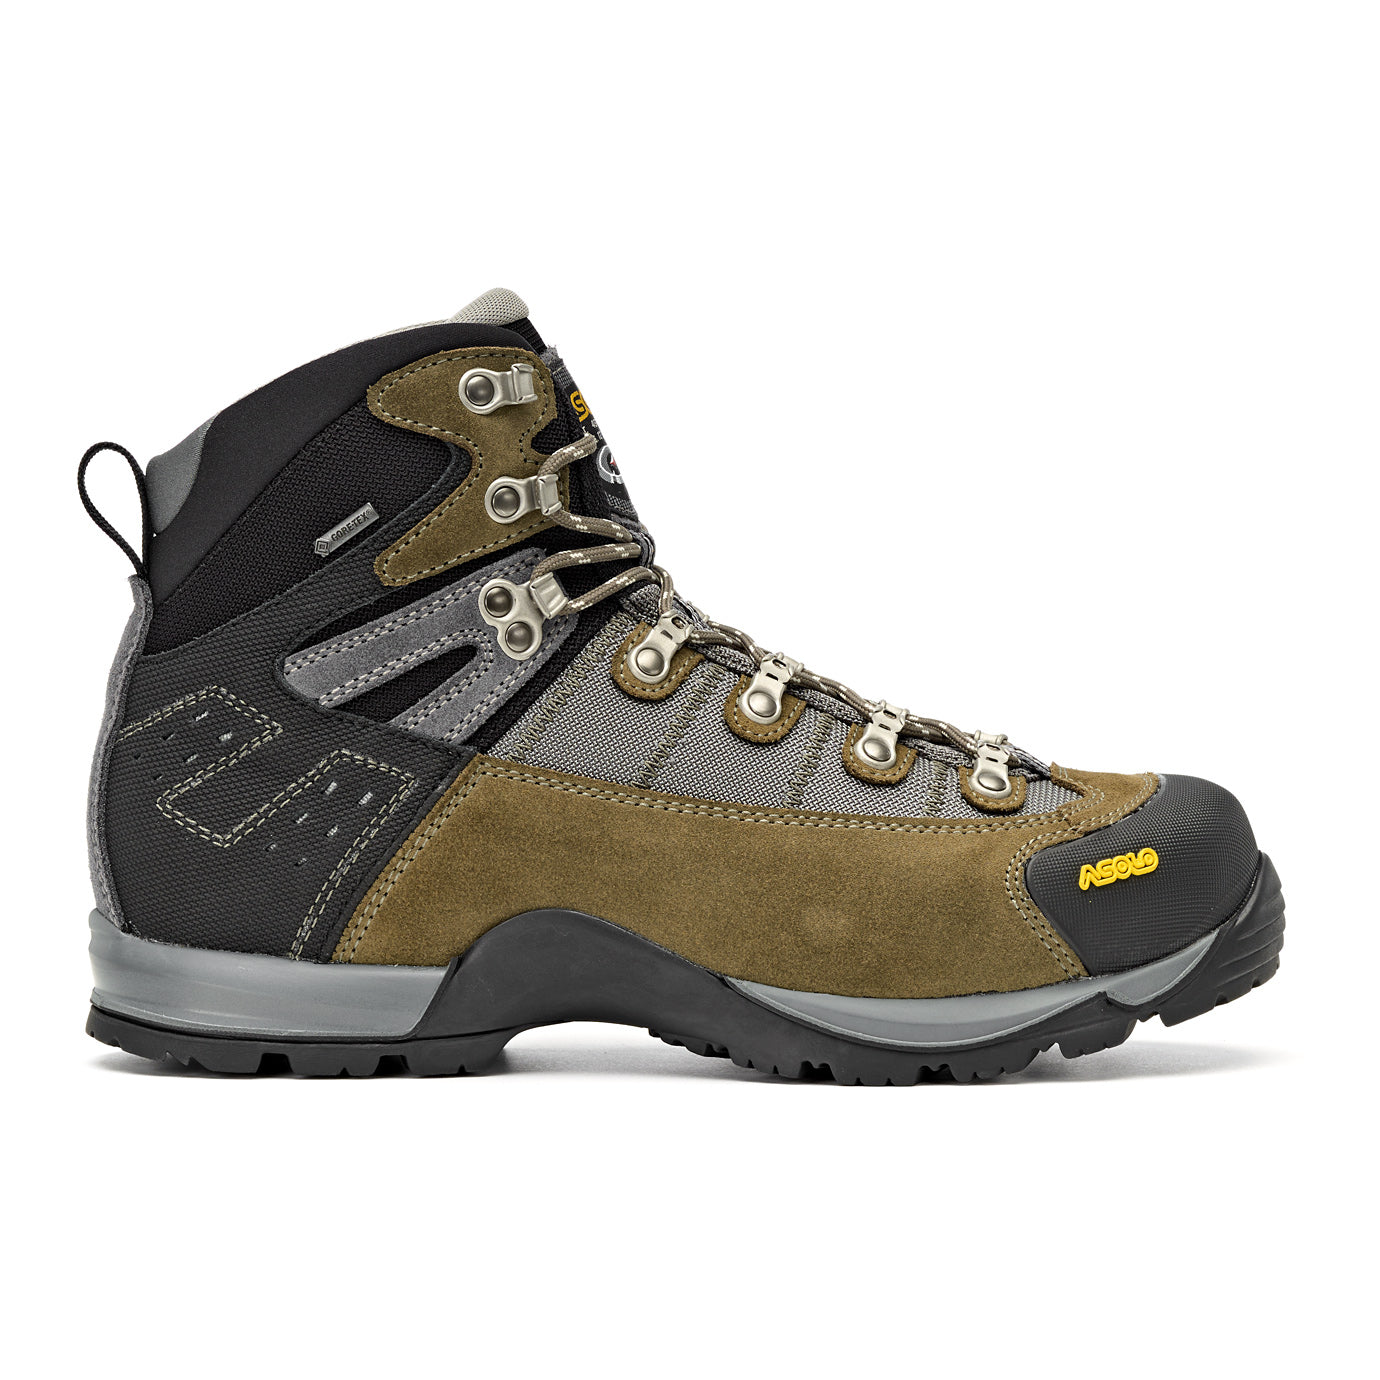 8 Best Hiking Clothes for Men ideas  mens hiking boots, hiking outfit men,  hiking